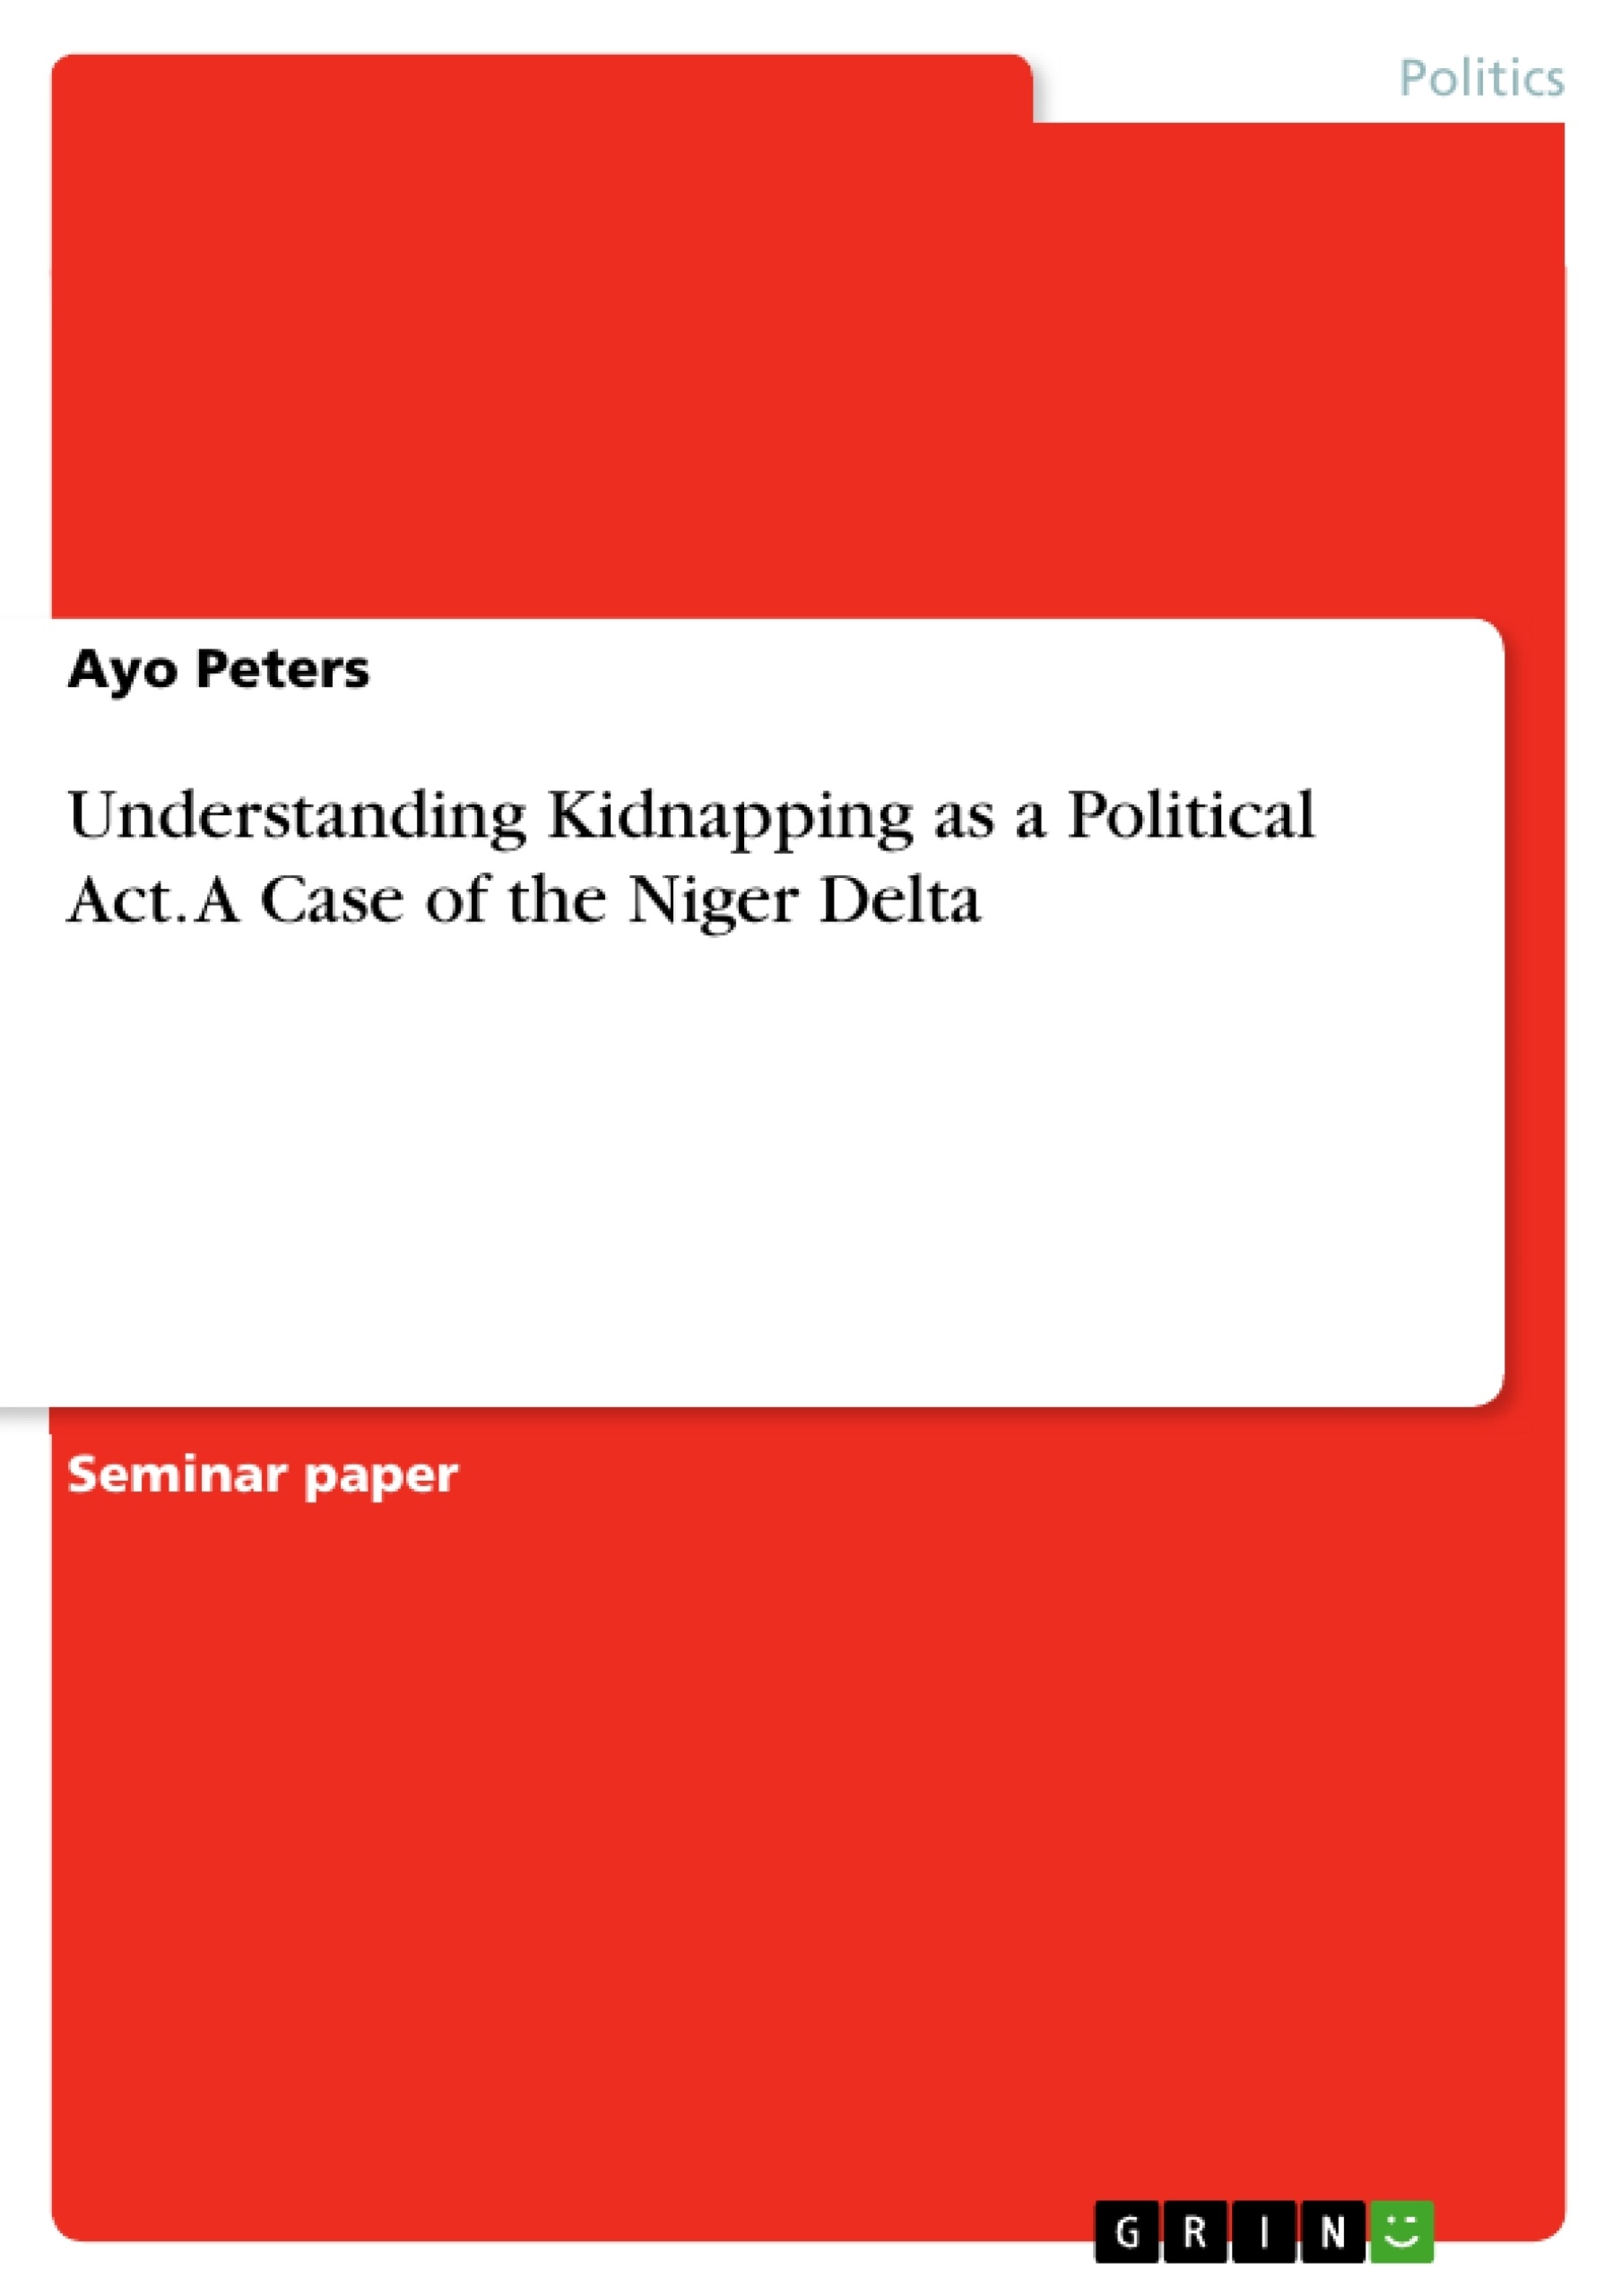 Title: Understanding Kidnapping as a Political Act. A Case of the Niger Delta